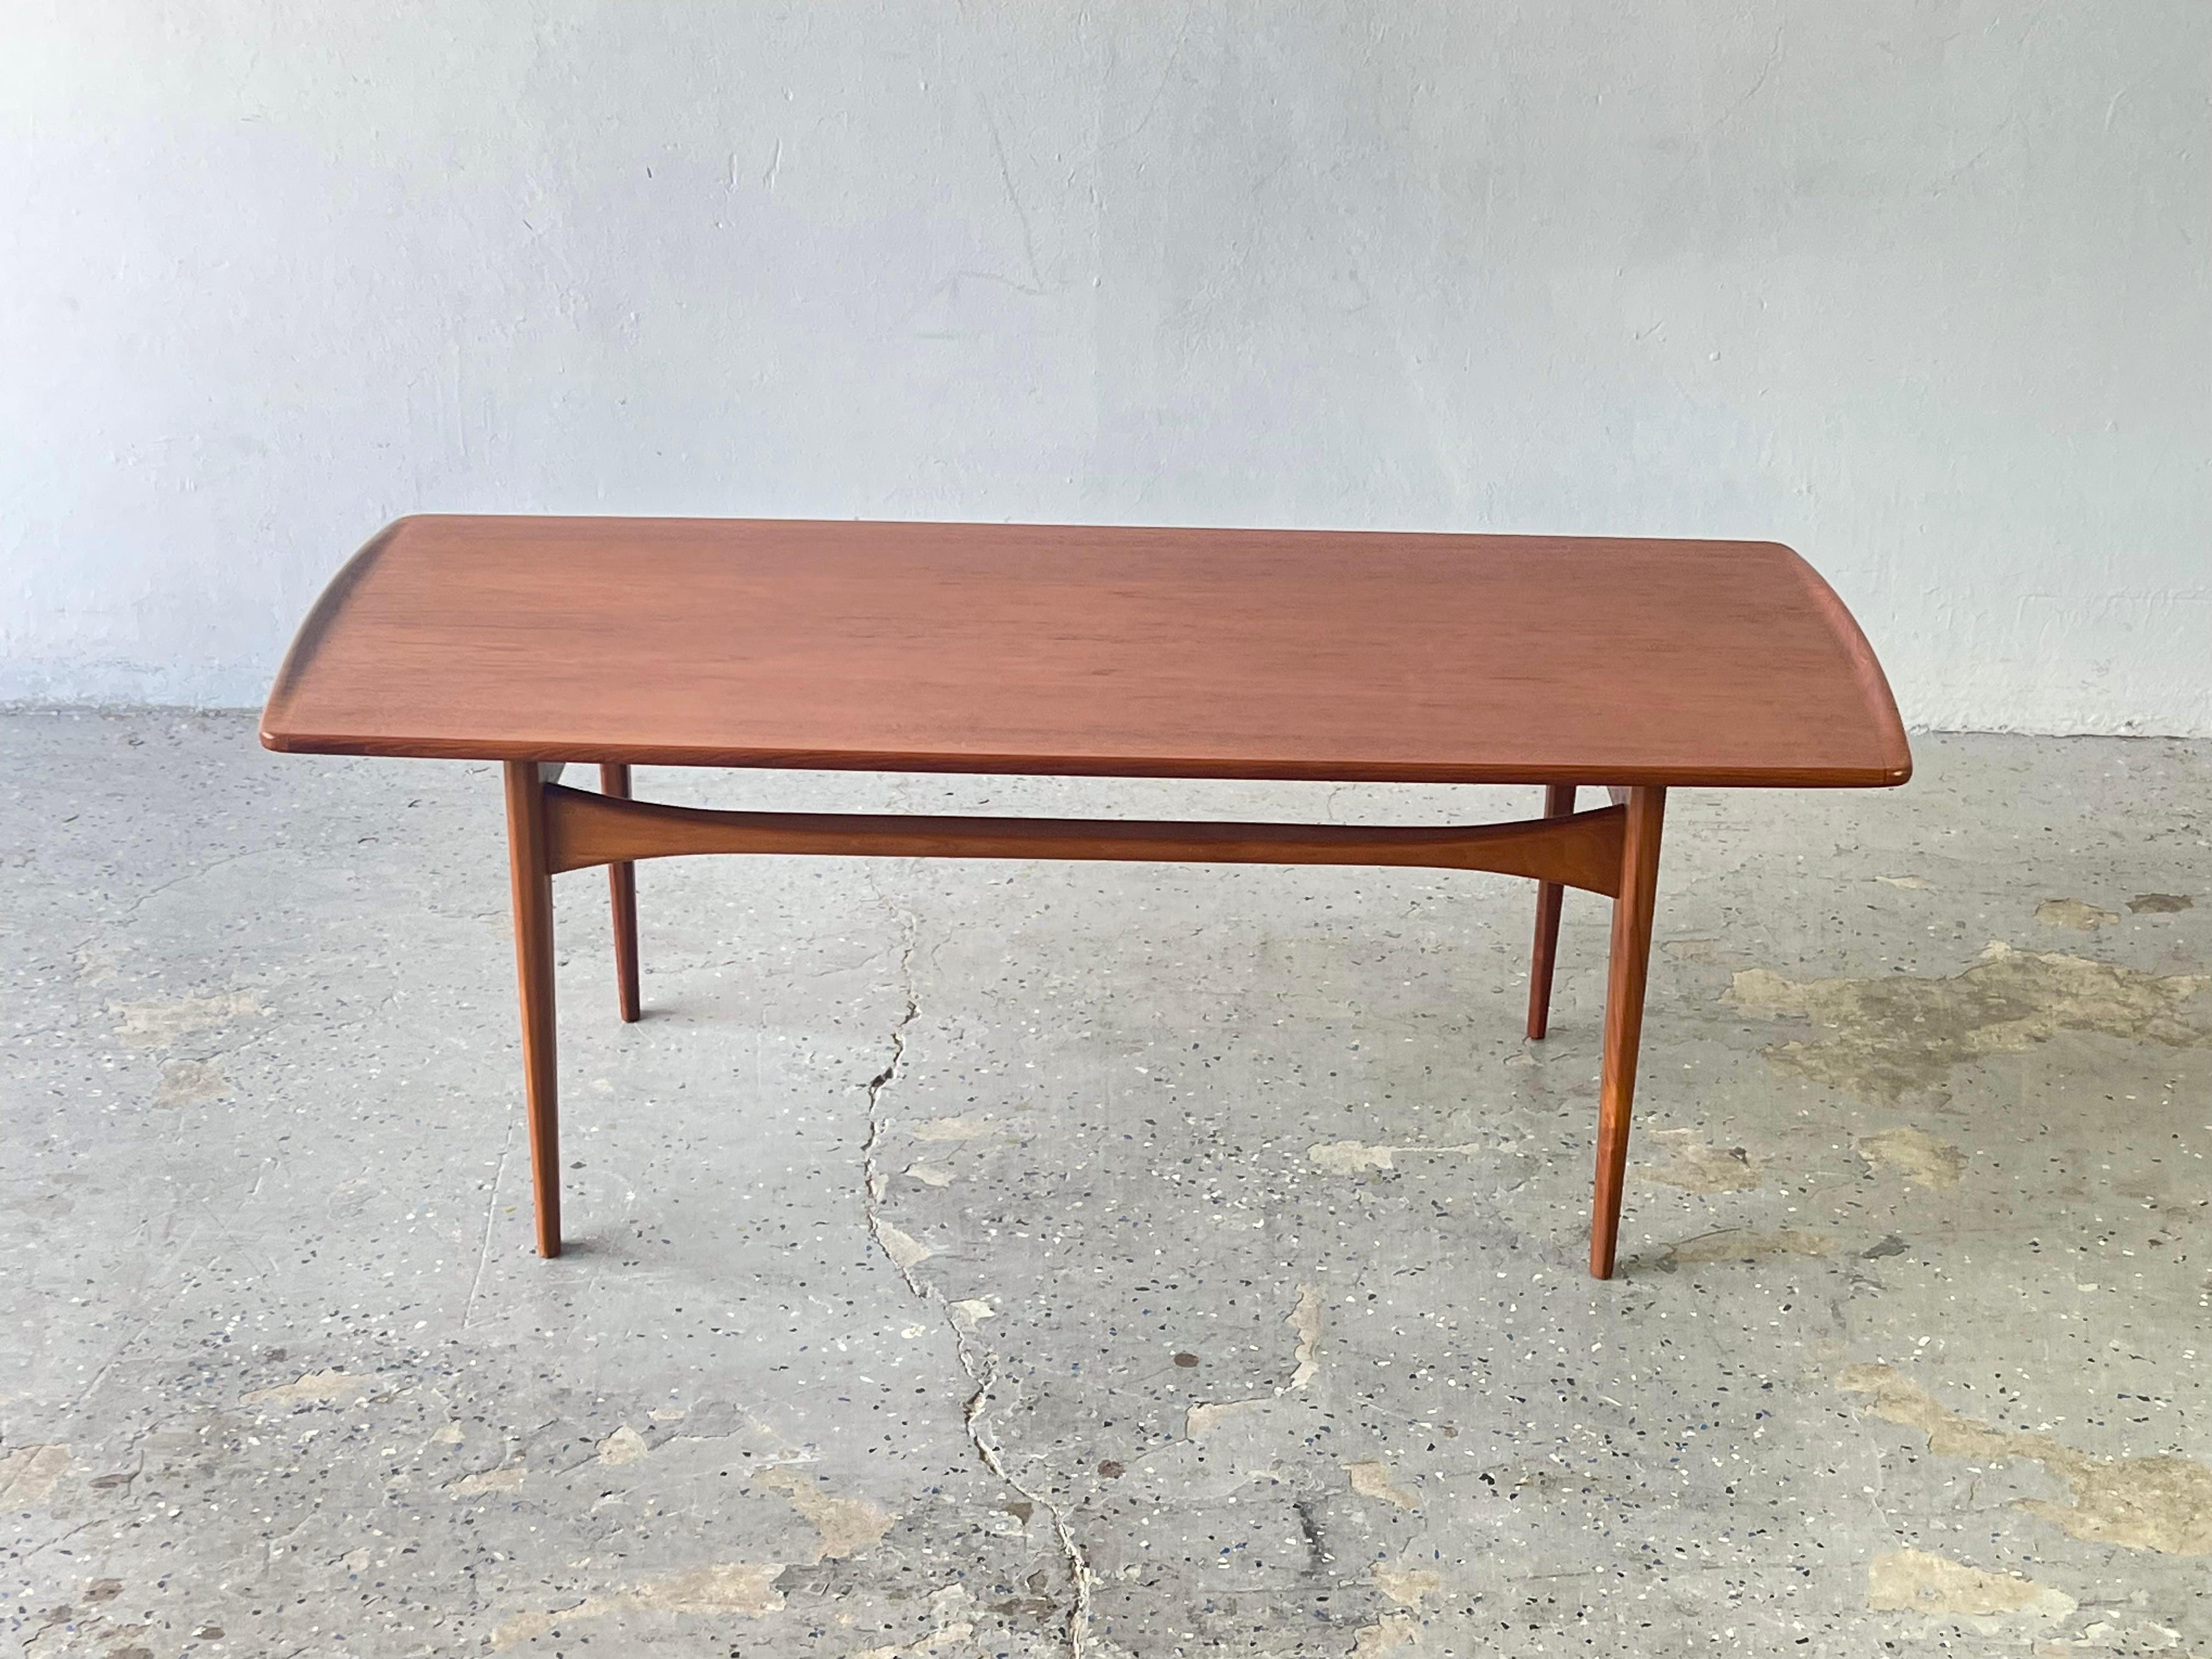 Danish Modern FD 503 teak coffee table by Tove & Edvard Kindt-Larsen for France & Søn.

This gorgeous teak coffee table with sleek lines and solid construction was manufactured in Denmark 1962-1963. Designed by Tove & Edvard Kindt Larsen model FS